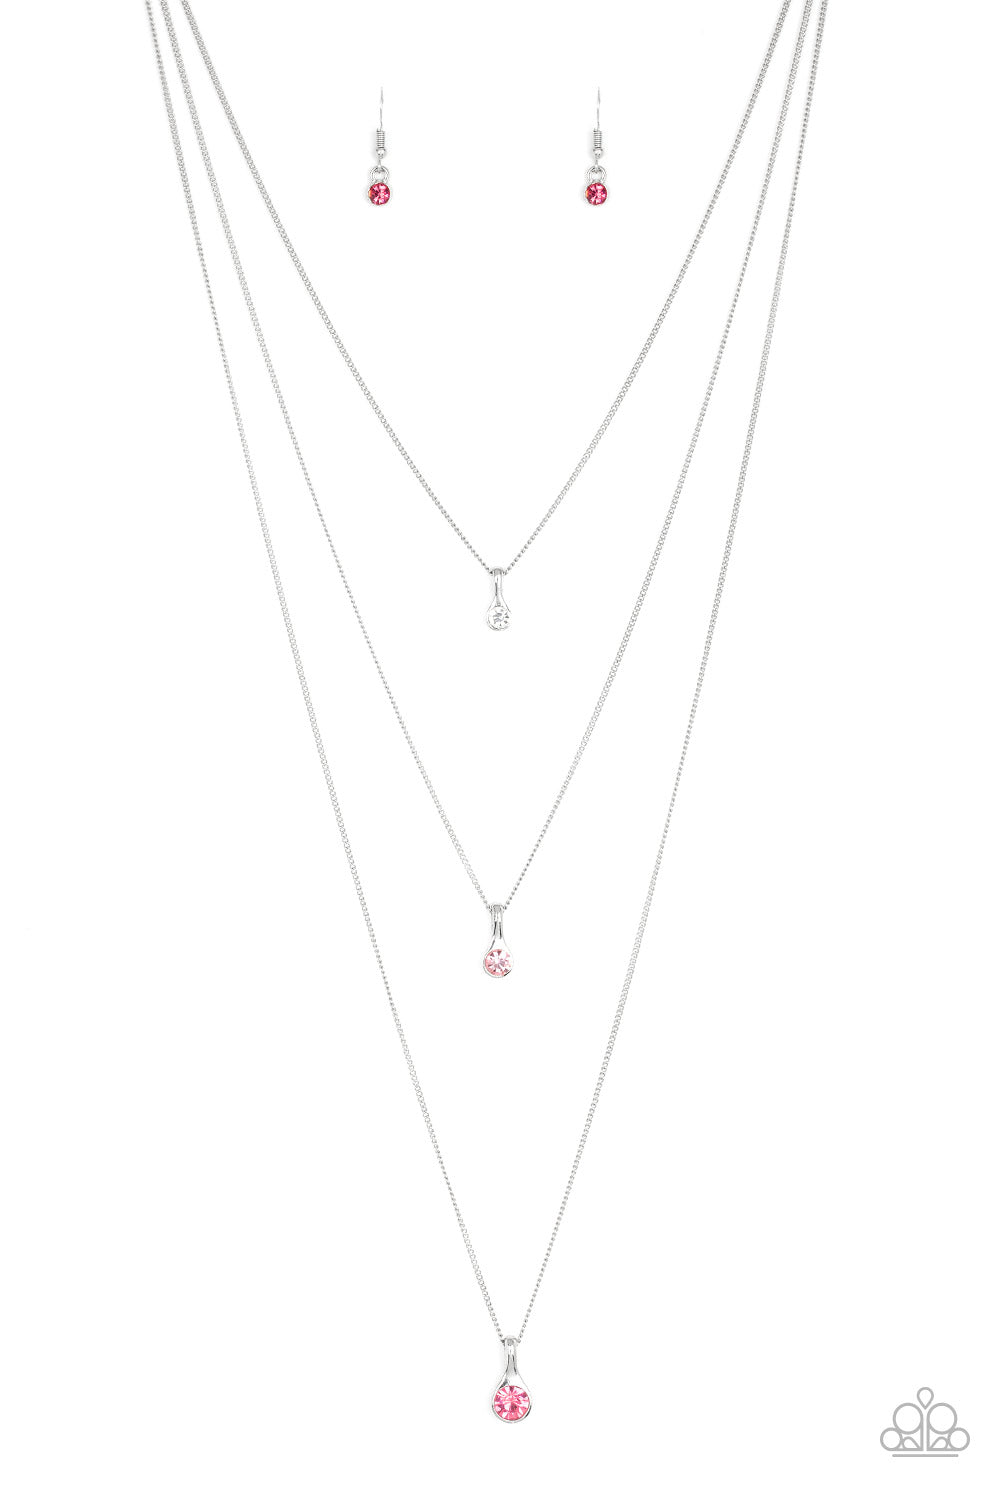 Crystal Chic - Pink Necklace Set